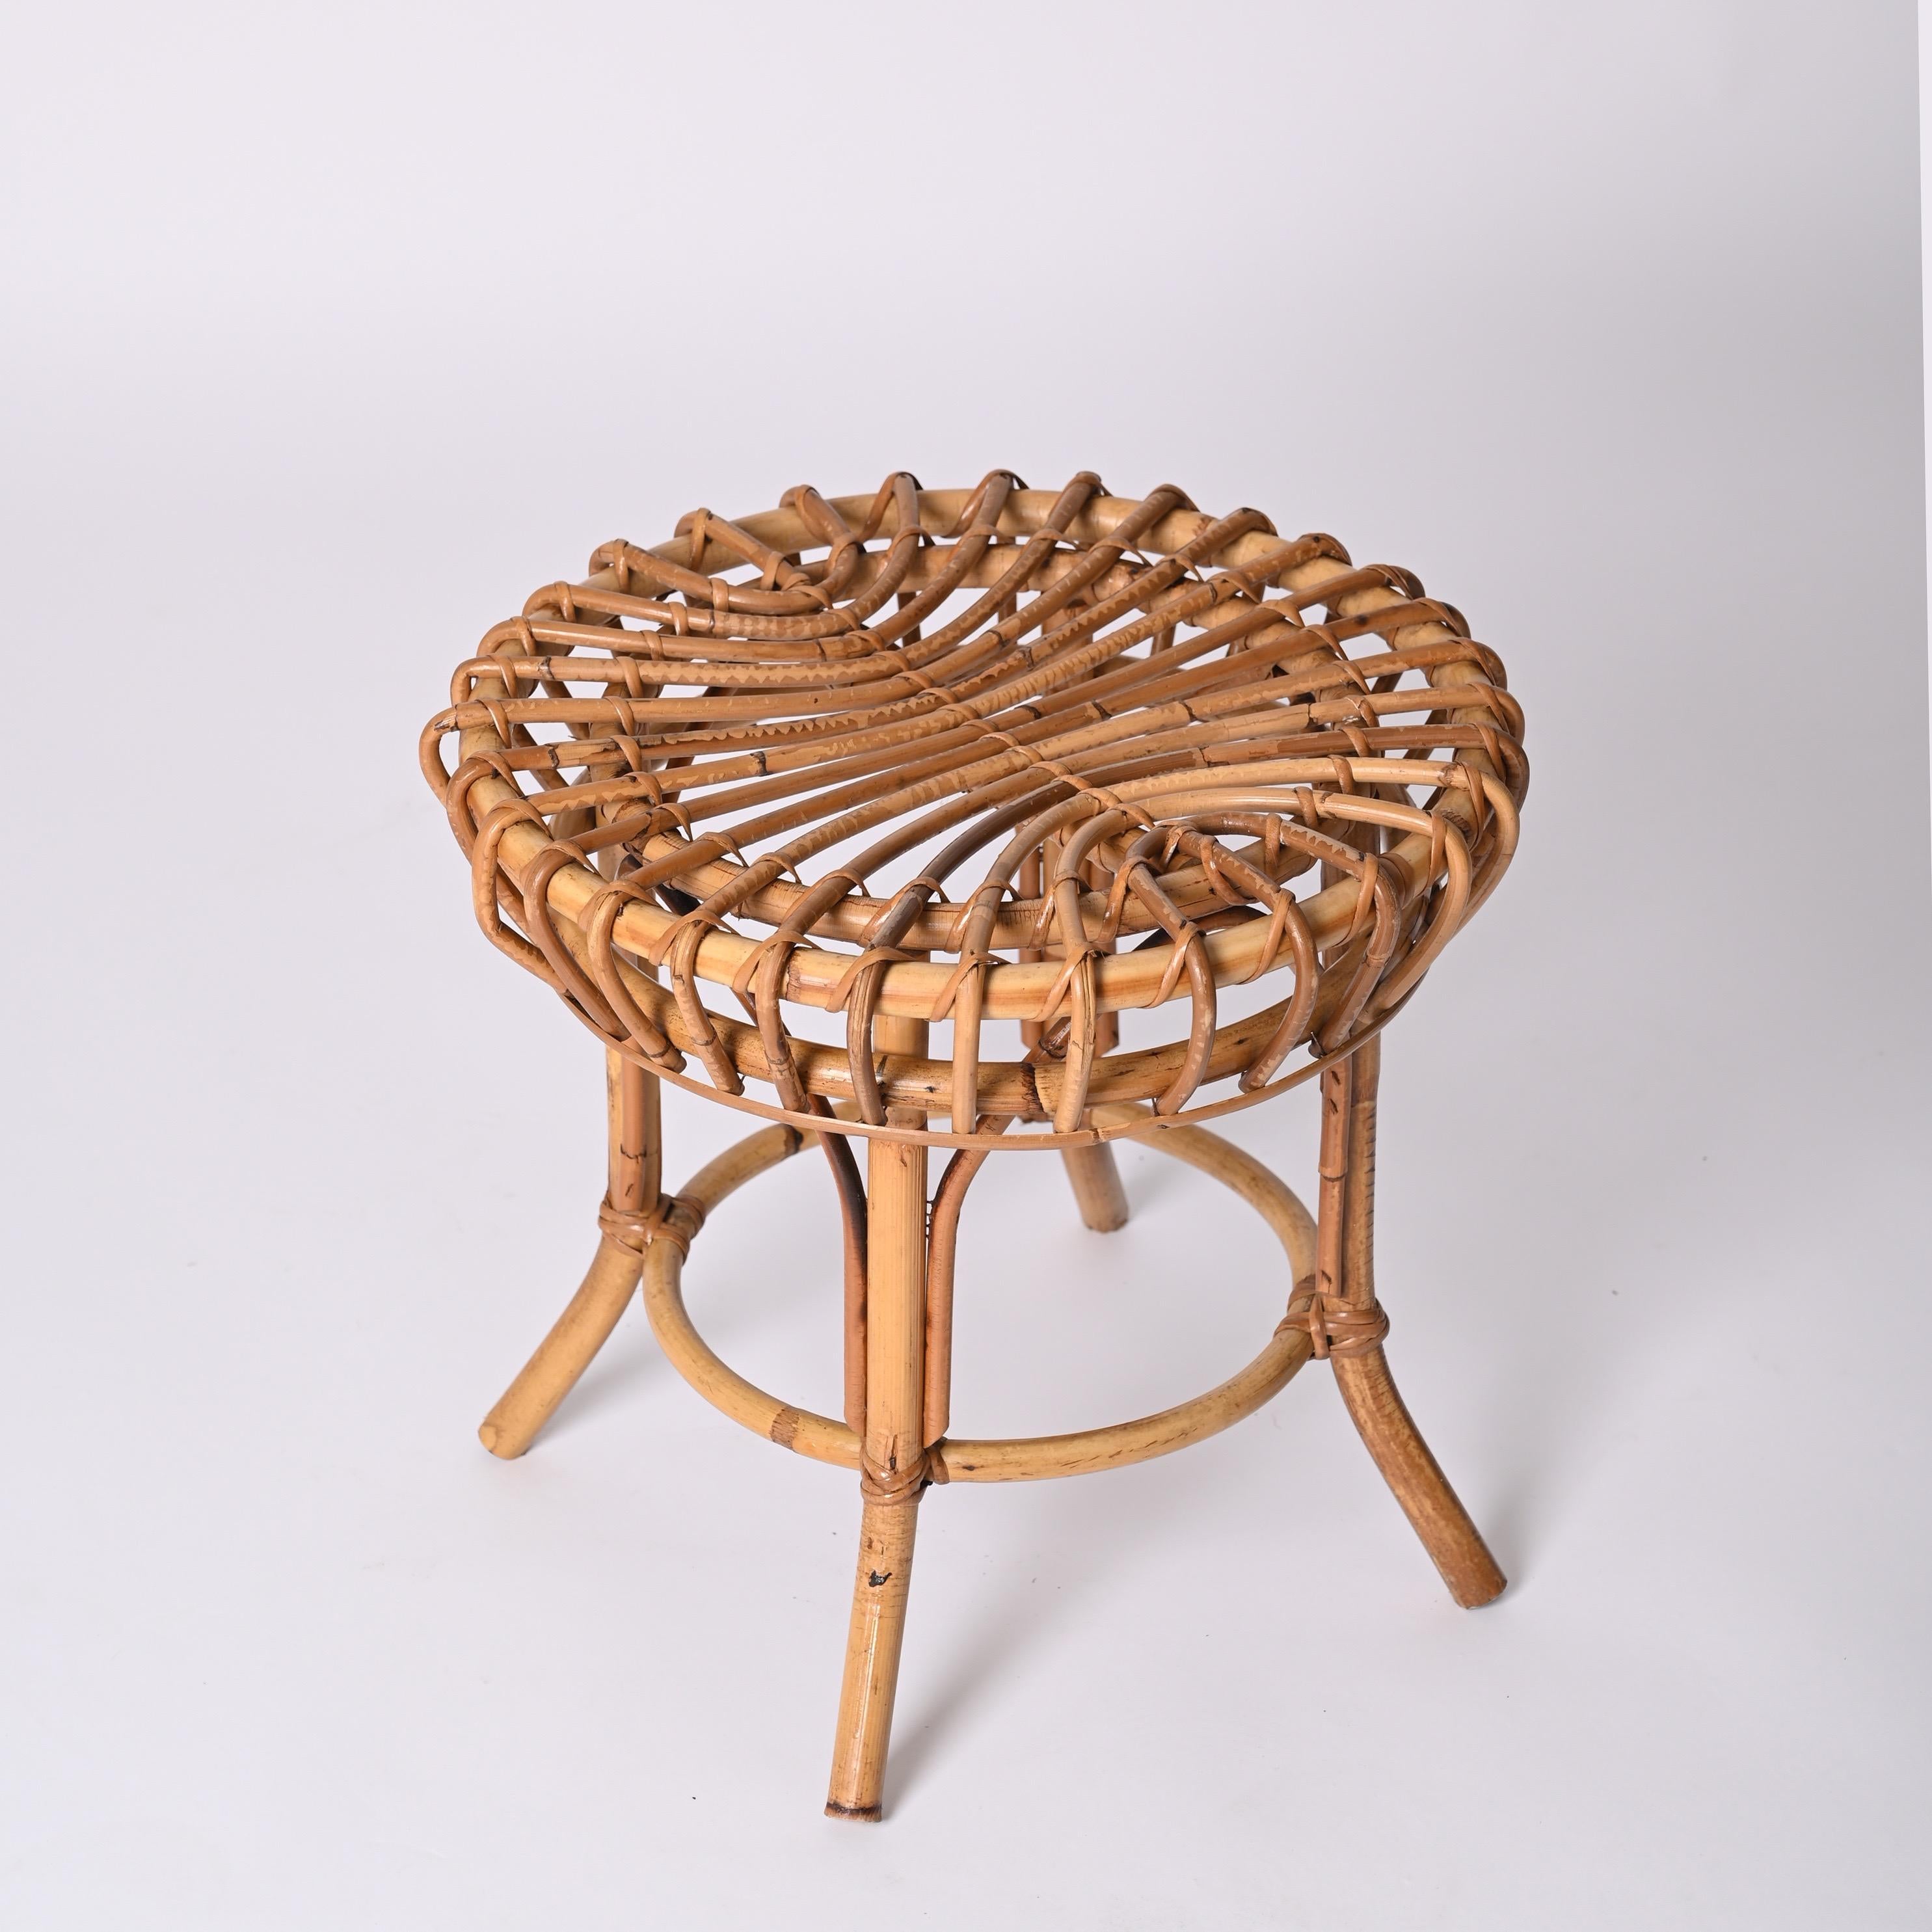 Franco Albini Midcentury Rattan and Bamboo Round Ottoman Stool, Italy 1960s For Sale 3